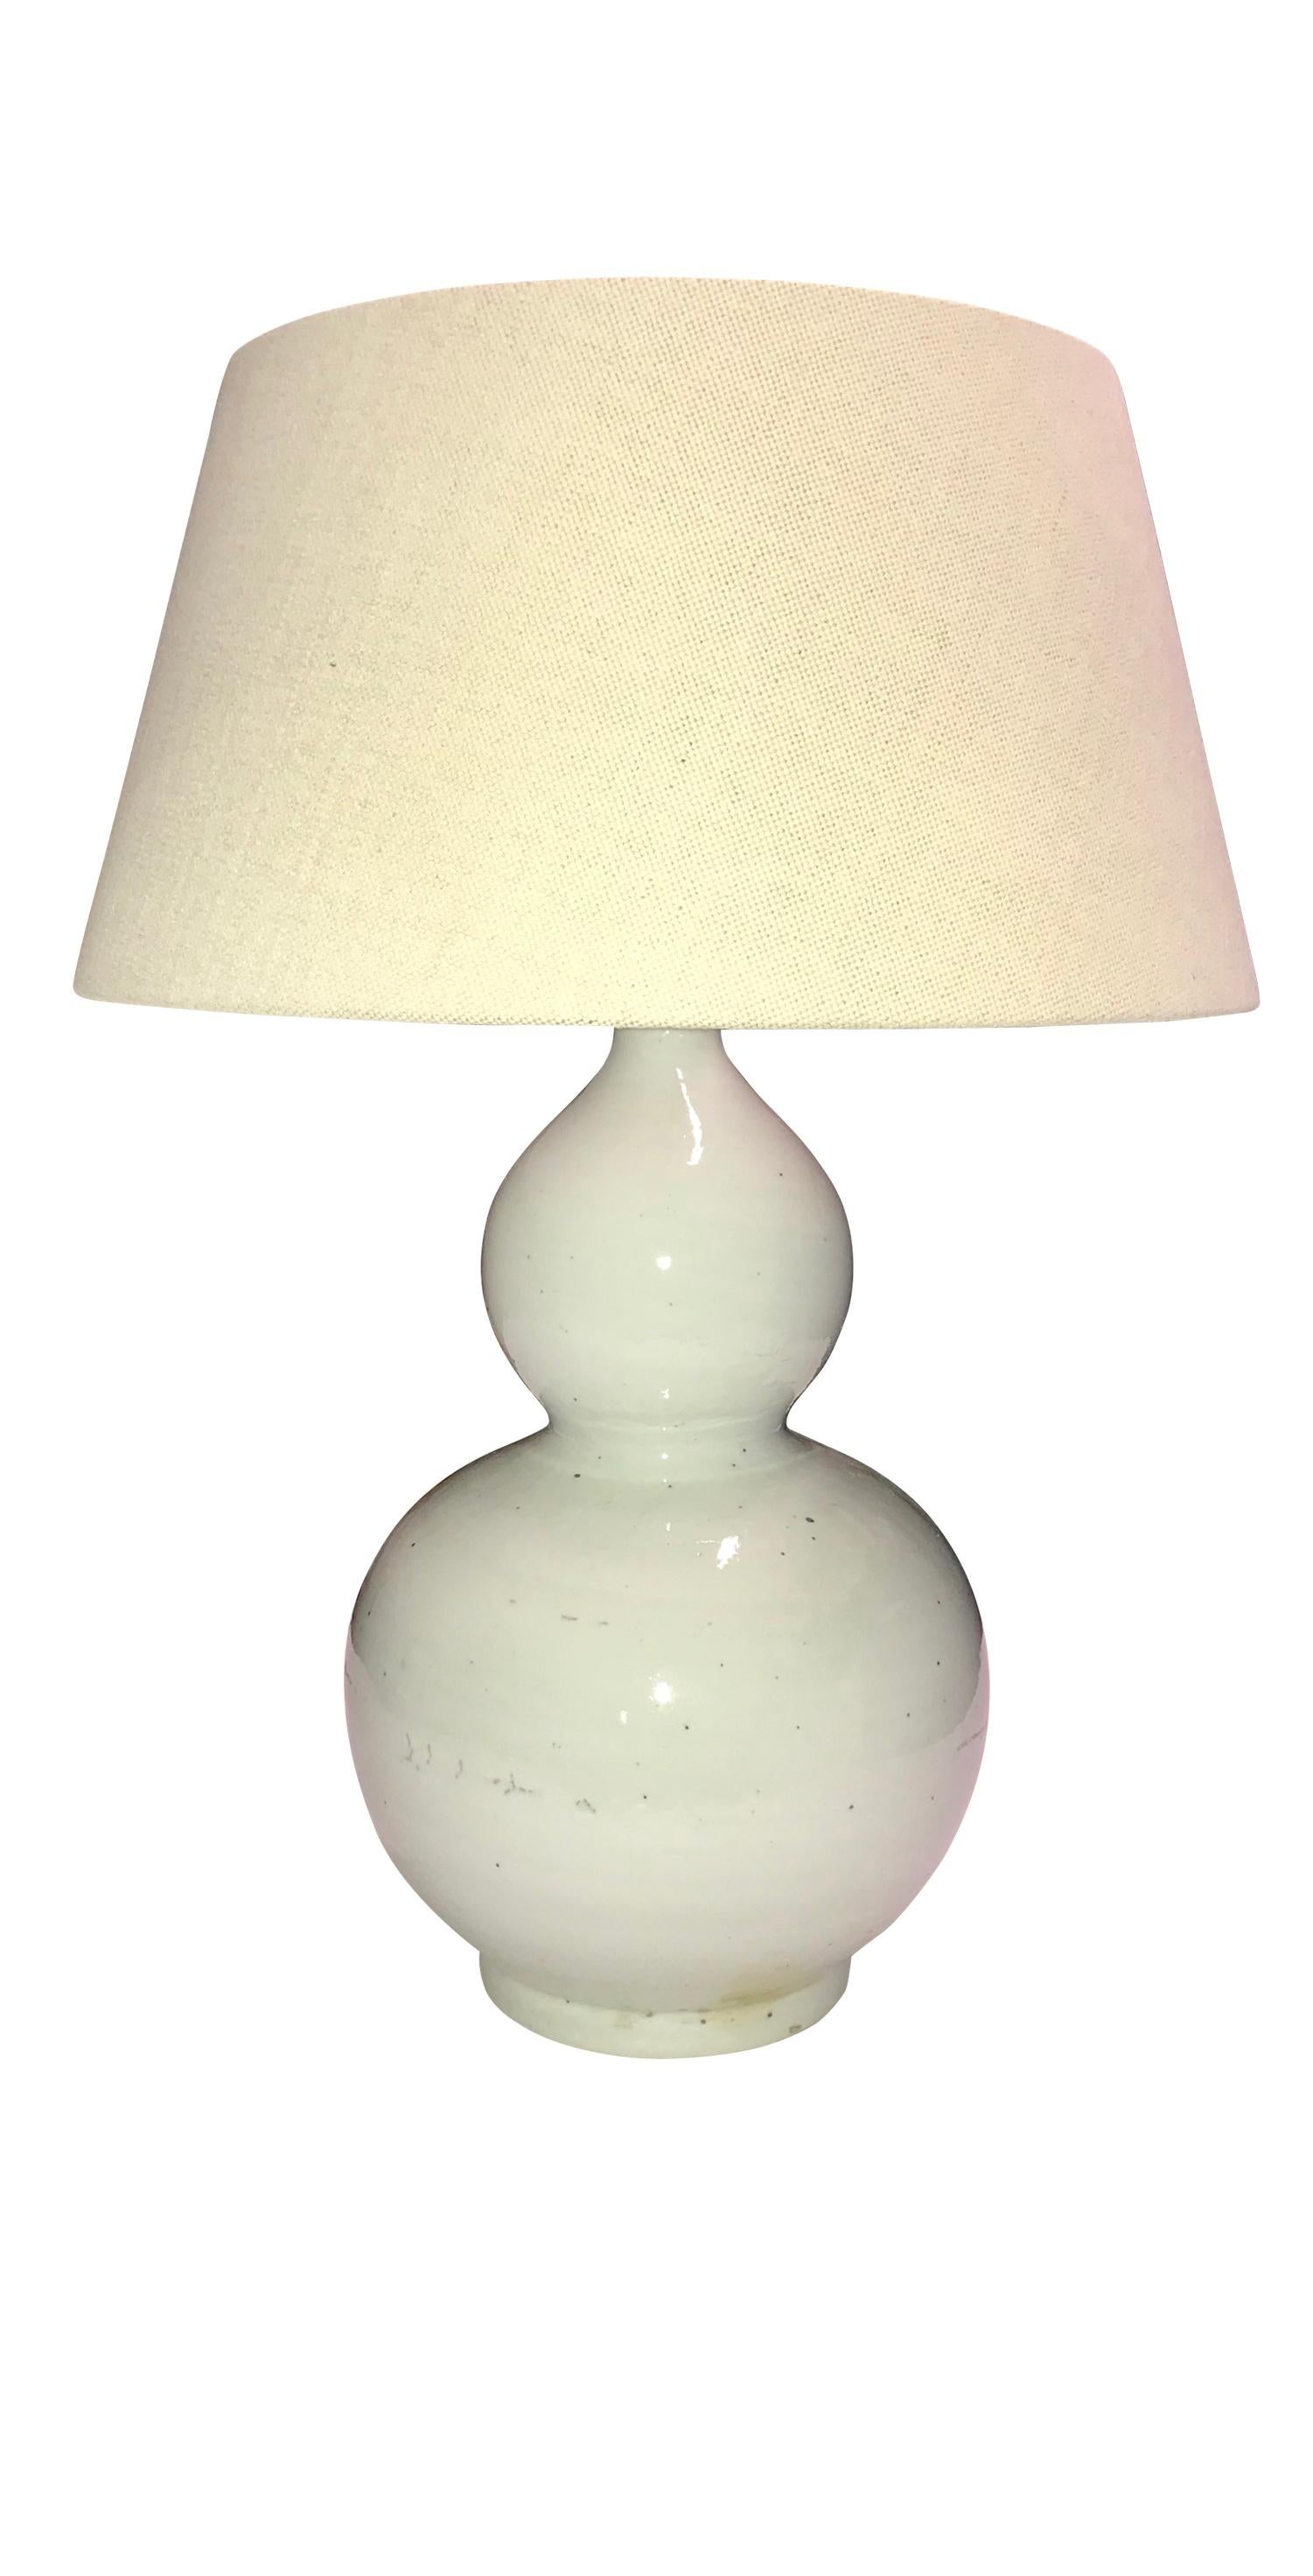 Contemporary pair of white glazed gourd shaped lamps
New Belgian linen shades
Measures: Overall height 24.5